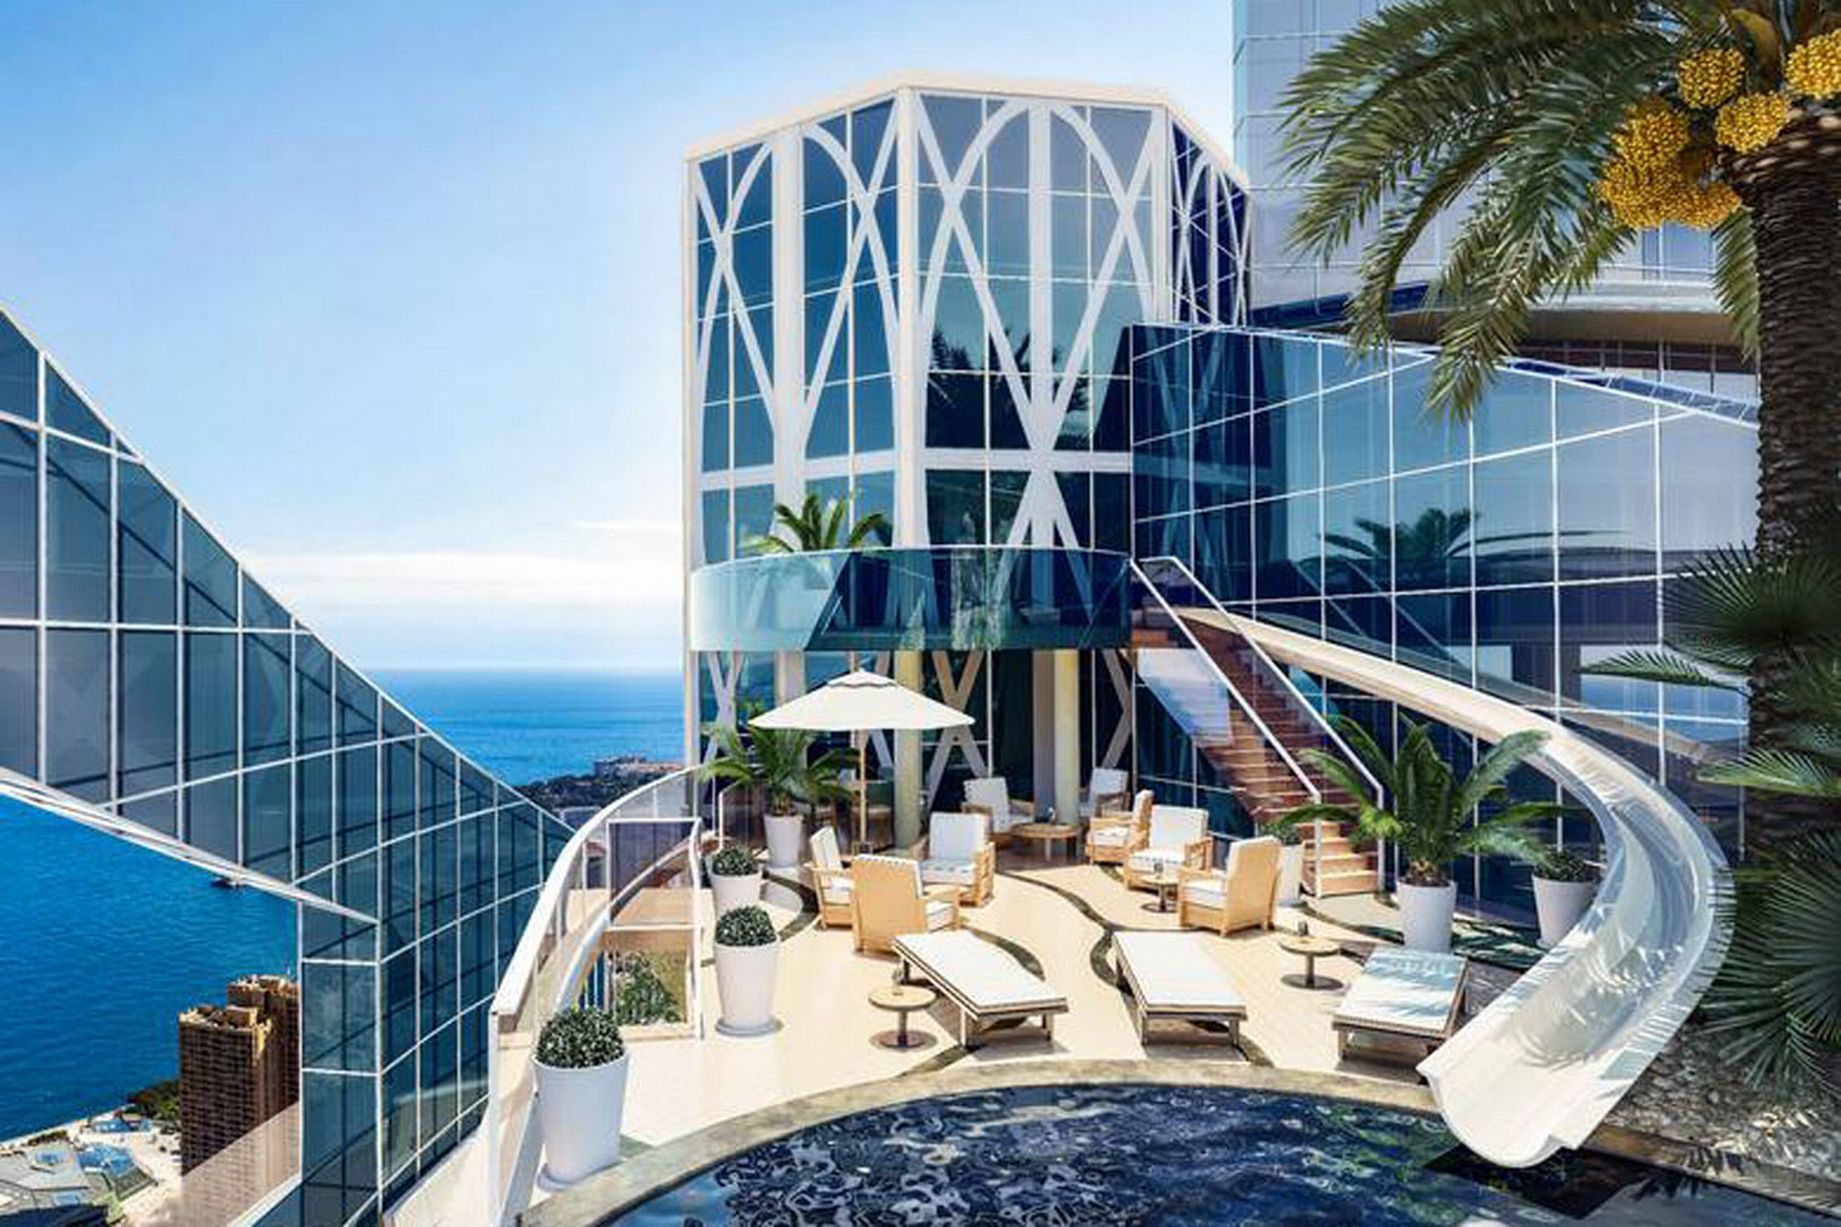 Top 10 Most Expensive Homes in the World